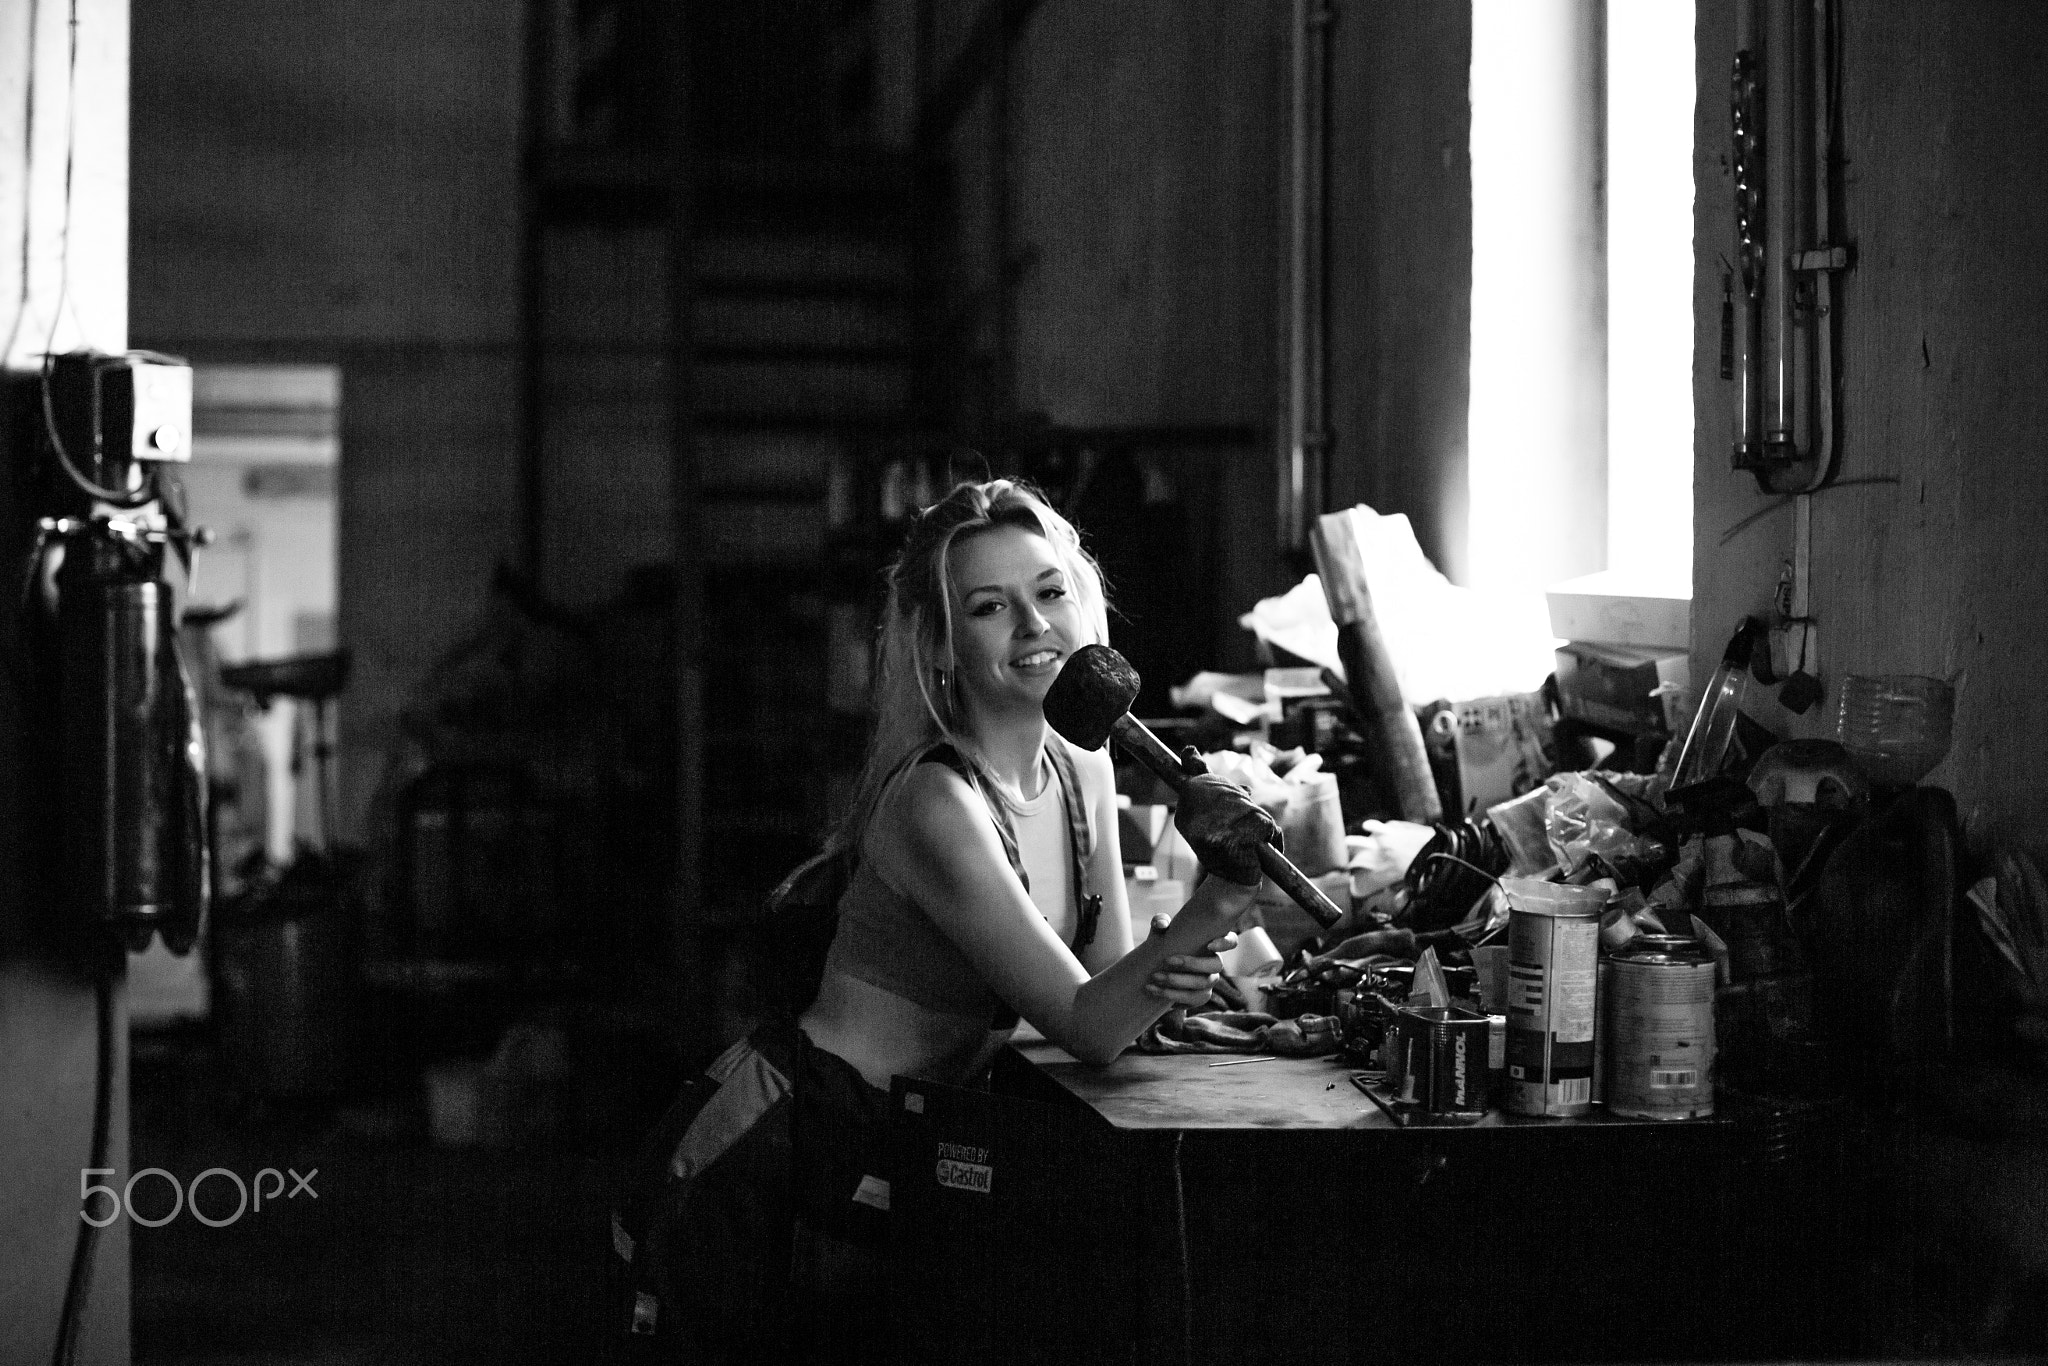 Sexual girl wearing dirty clothes posing in the workshop